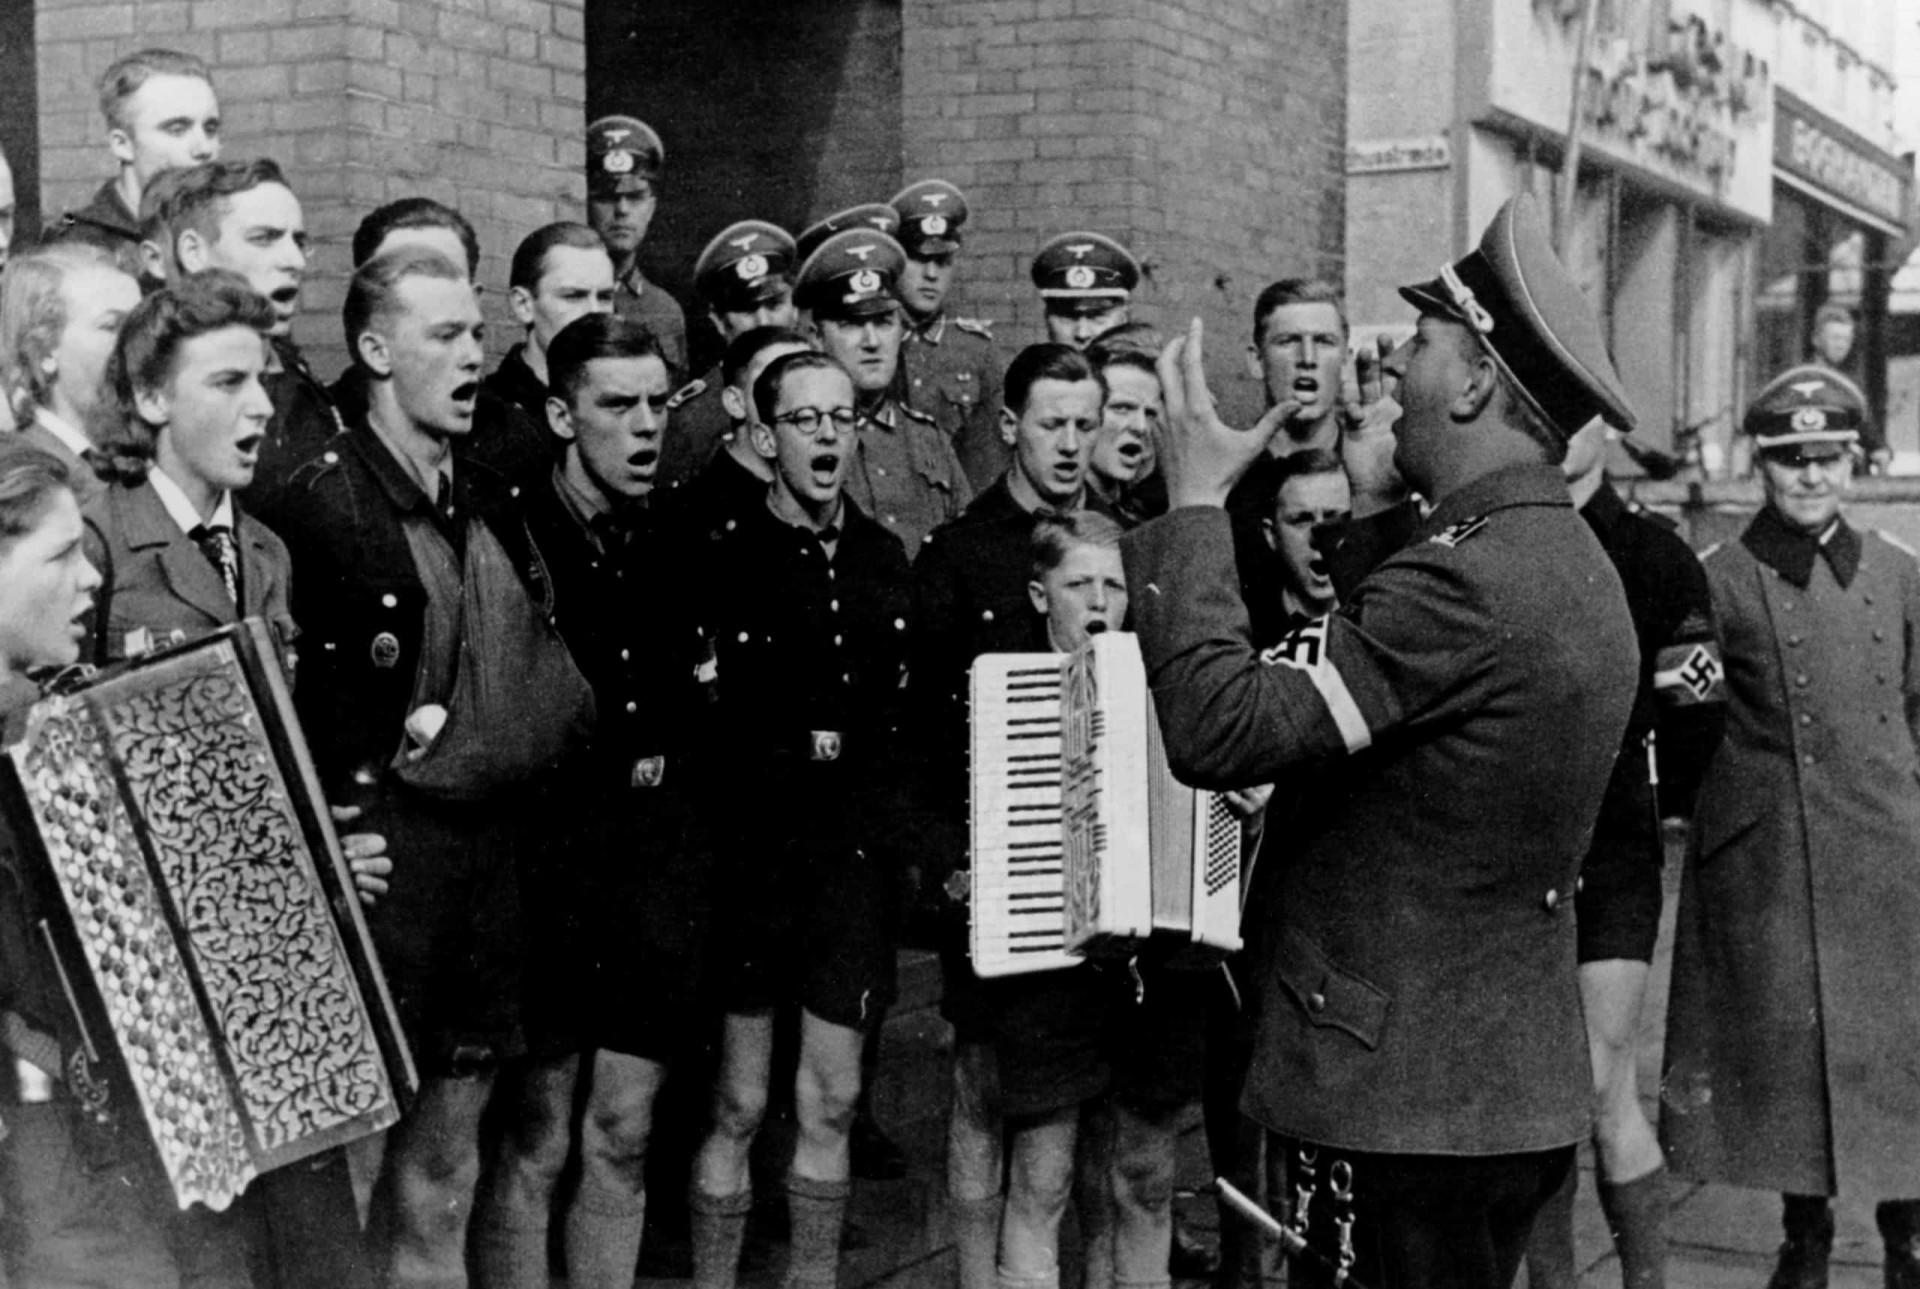 <p>A choir from Hamburg performed for German occupation forces, singing loudly in front of Esbjerg's city hall.</p><p><a href="https://www.msn.com/en-my/community/channel/vid-7xx8mnucu55yw63we9va2gwr7uihbxwc68fxqp25x6tg4ftibpra?cvid=94631541bc0f4f89bfd59158d696ad7e">Follow us and access great exclusive content every day</a></p>